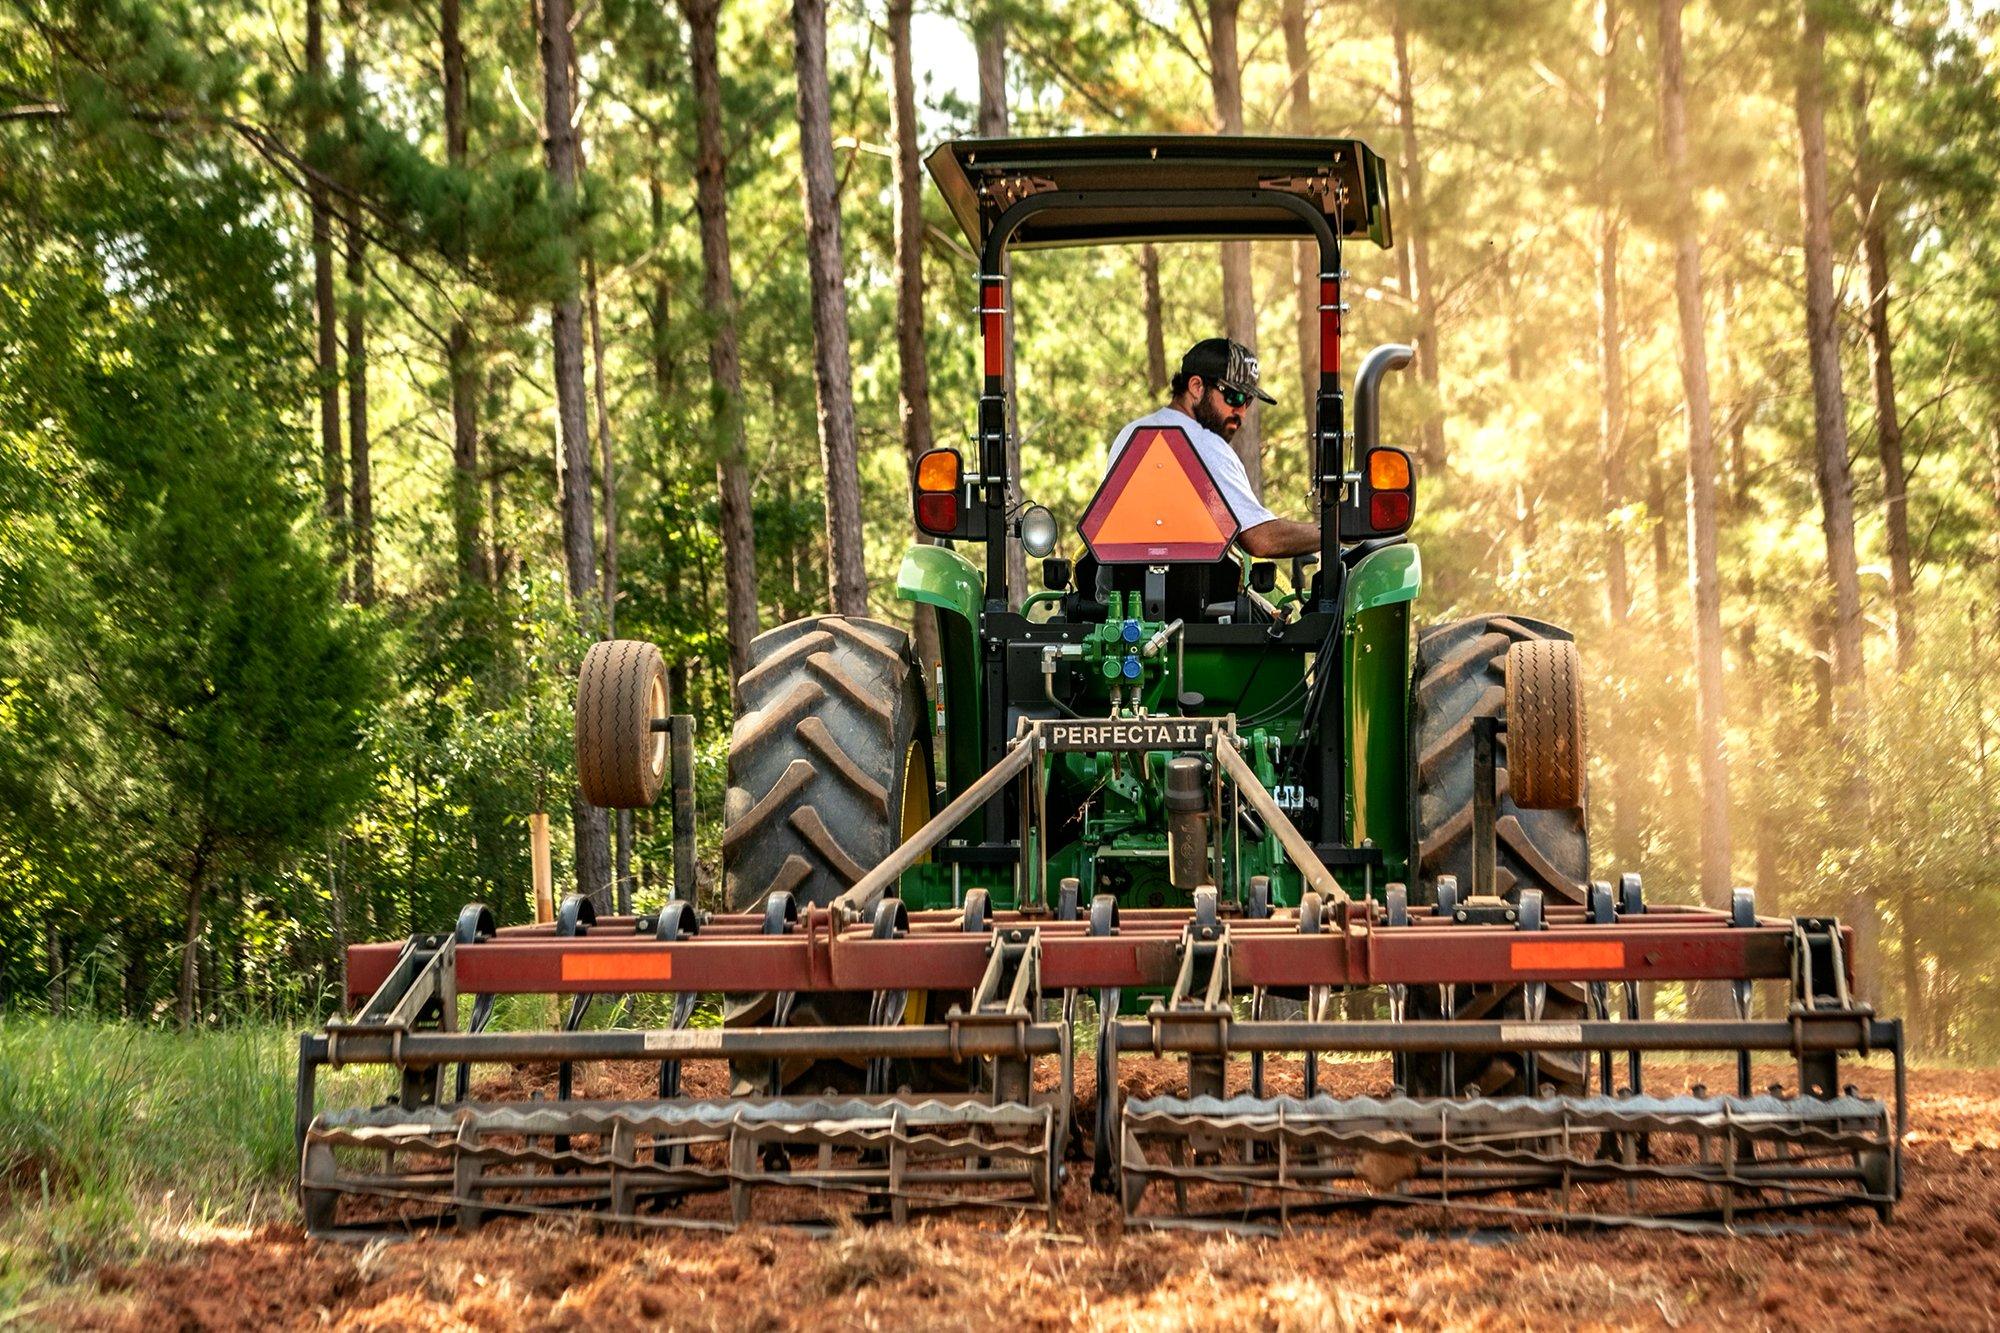 Image: ImageBy_Realtree_compact_tractor_4